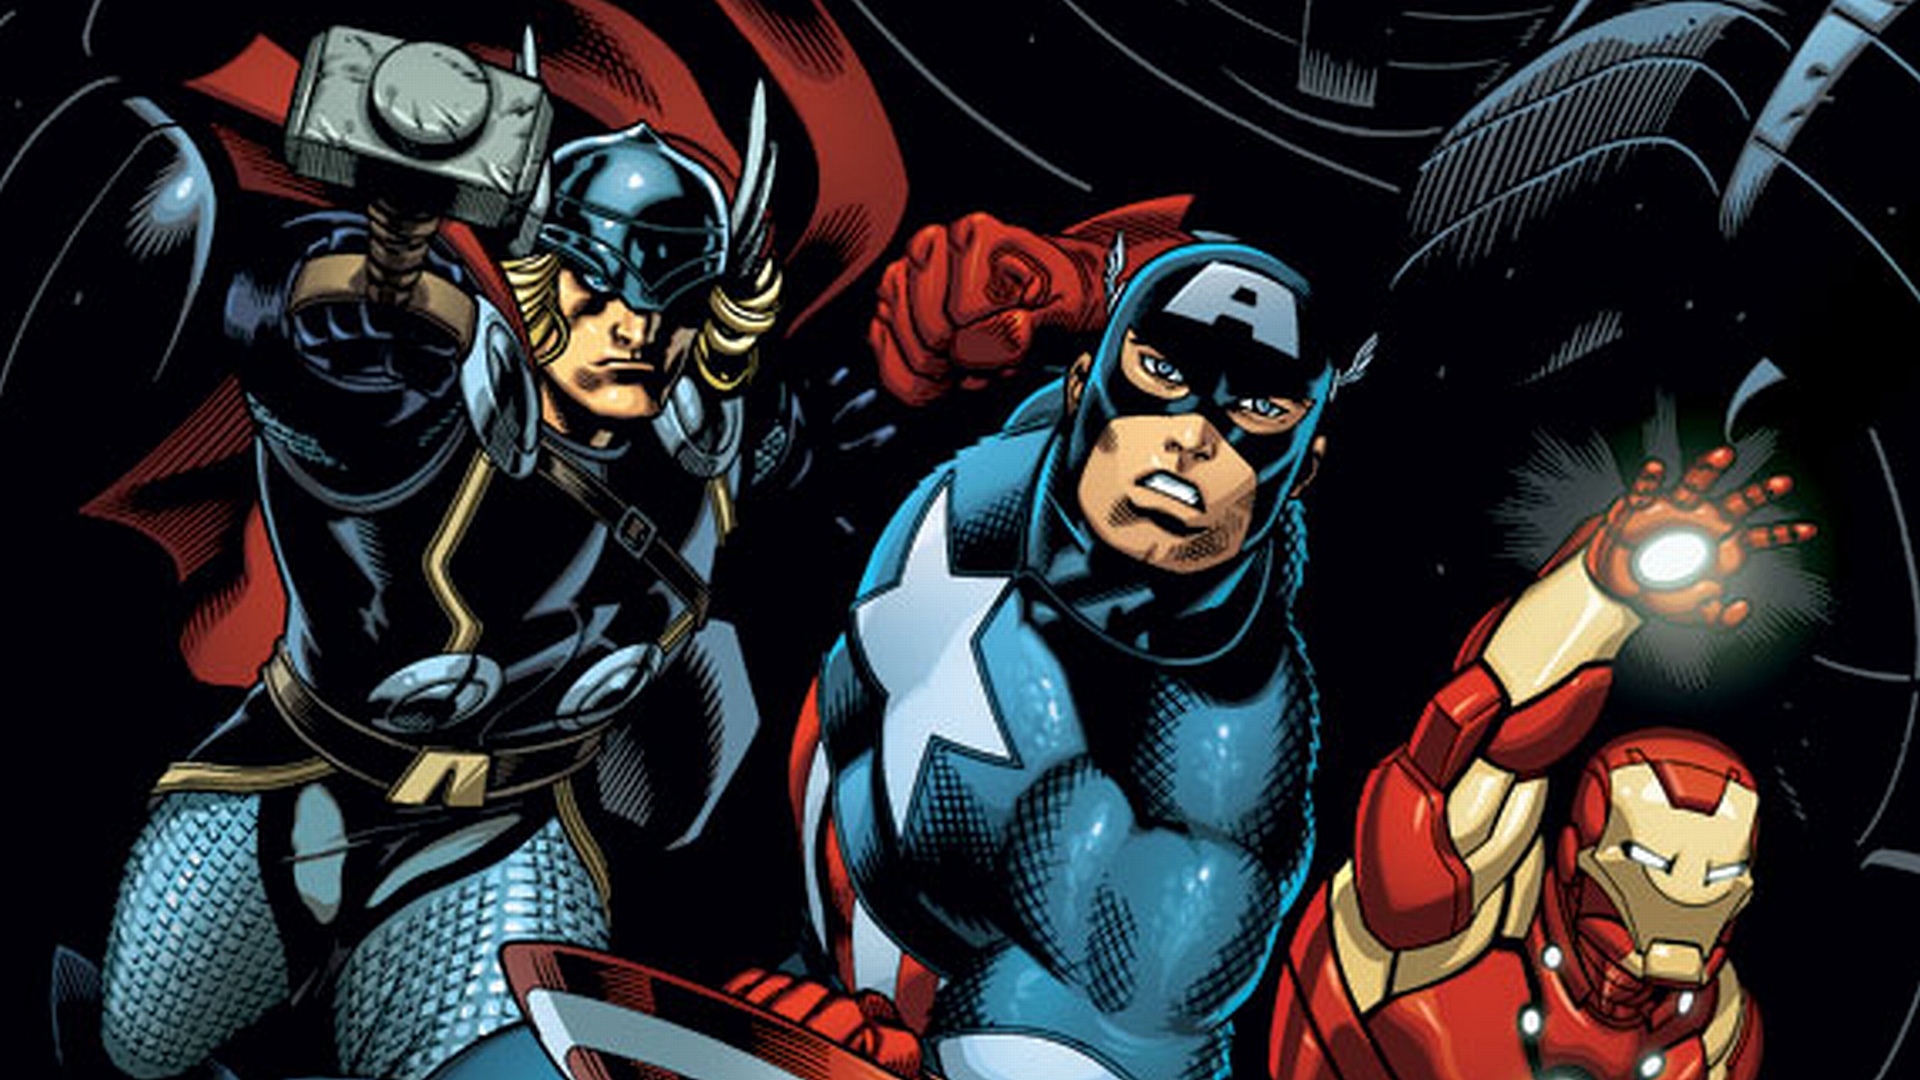 Powerful superheroes from Avengers: Thor, Captain America, and Iron Man in a comic-style desktop wallpaper.